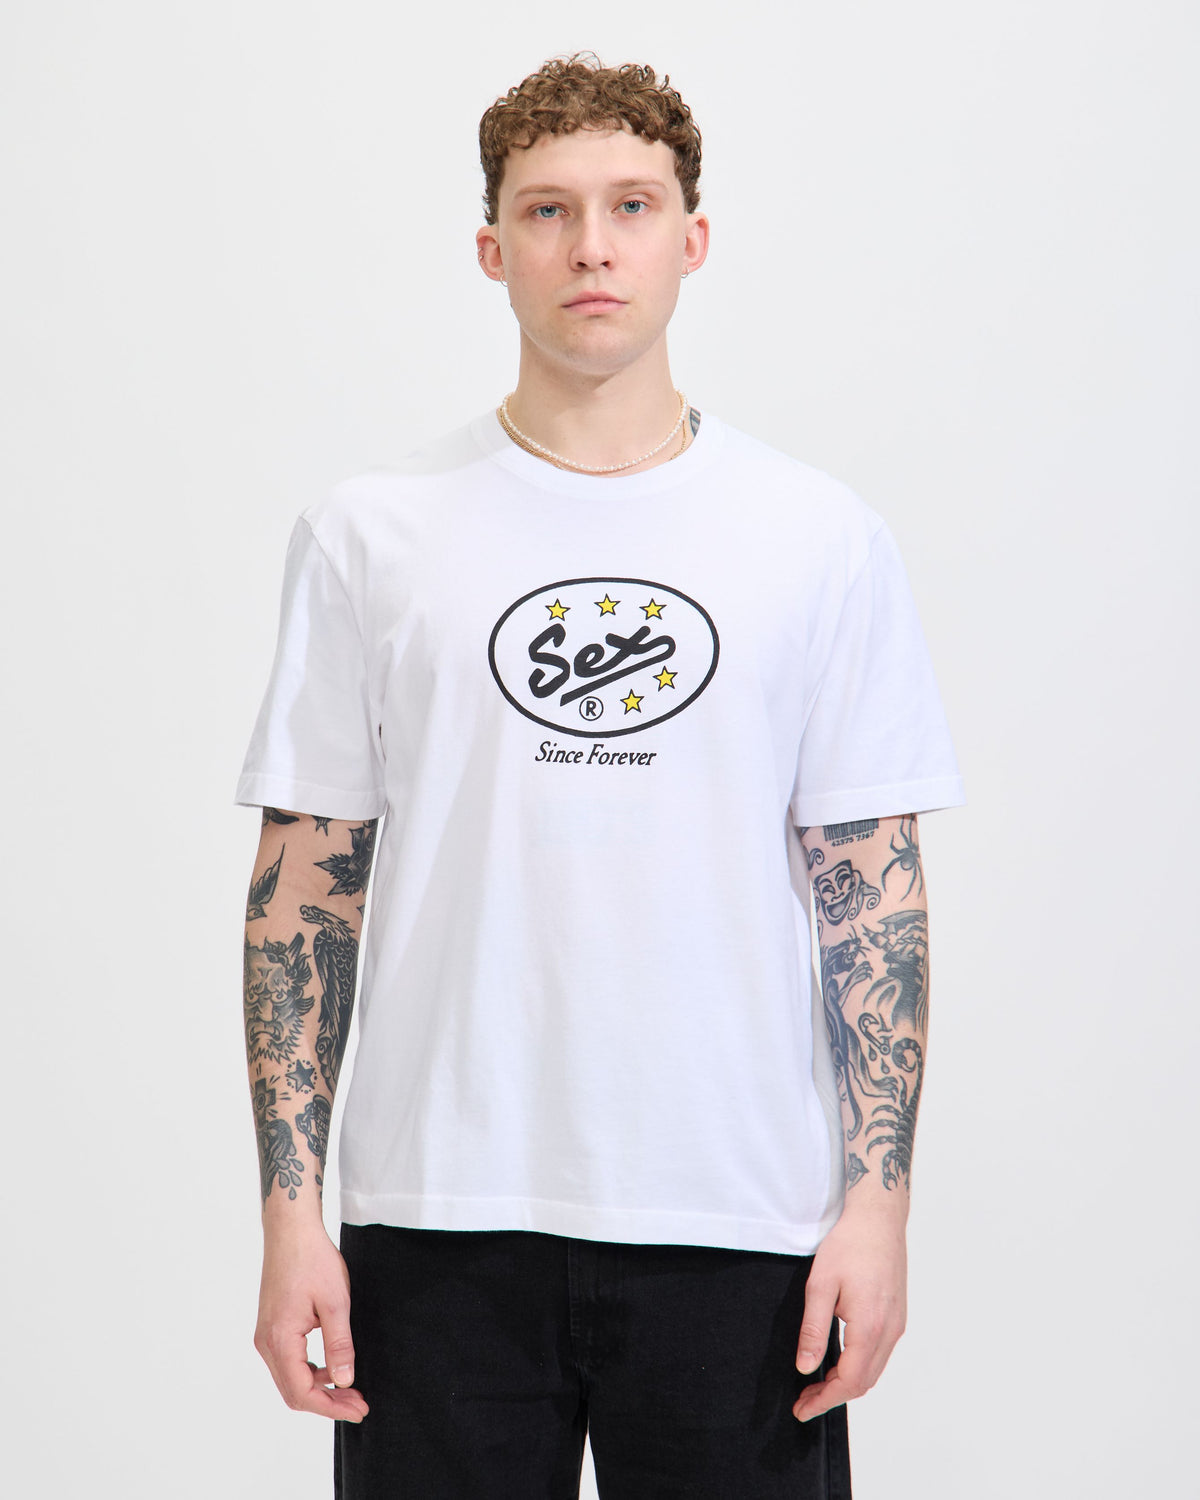 Since Forever Tee in White